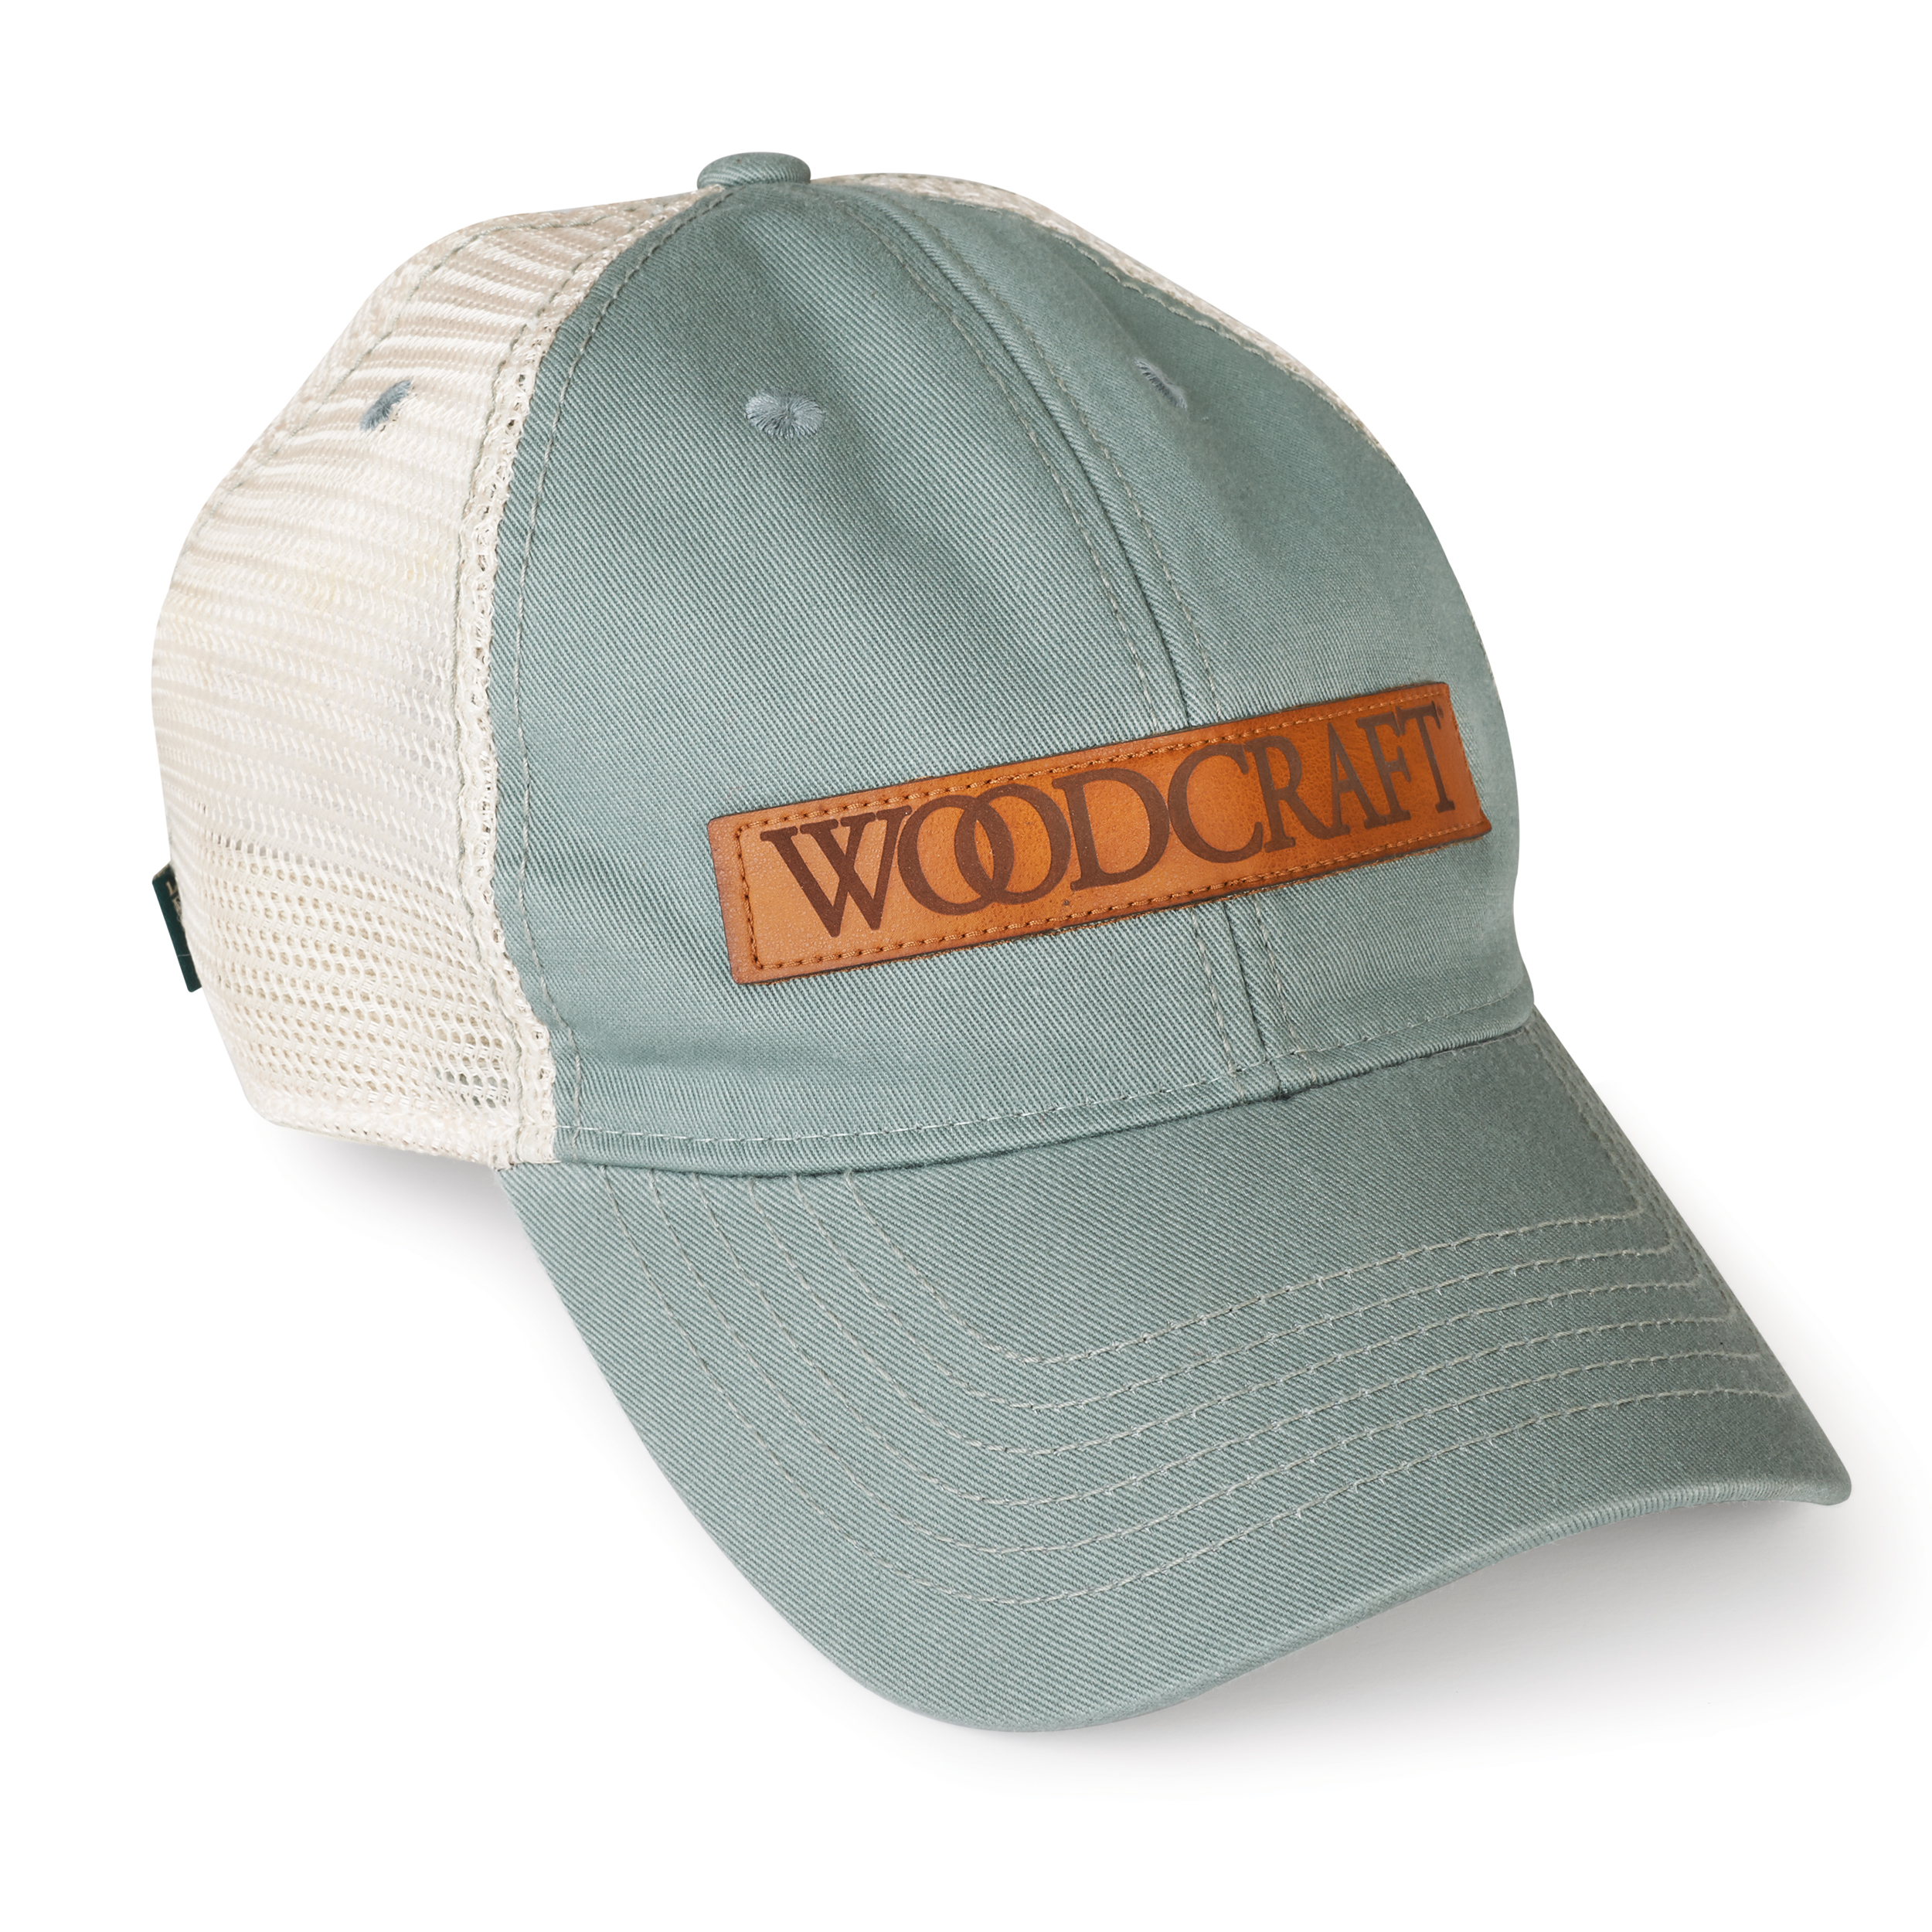 Woodcraft Leather Patch Hat